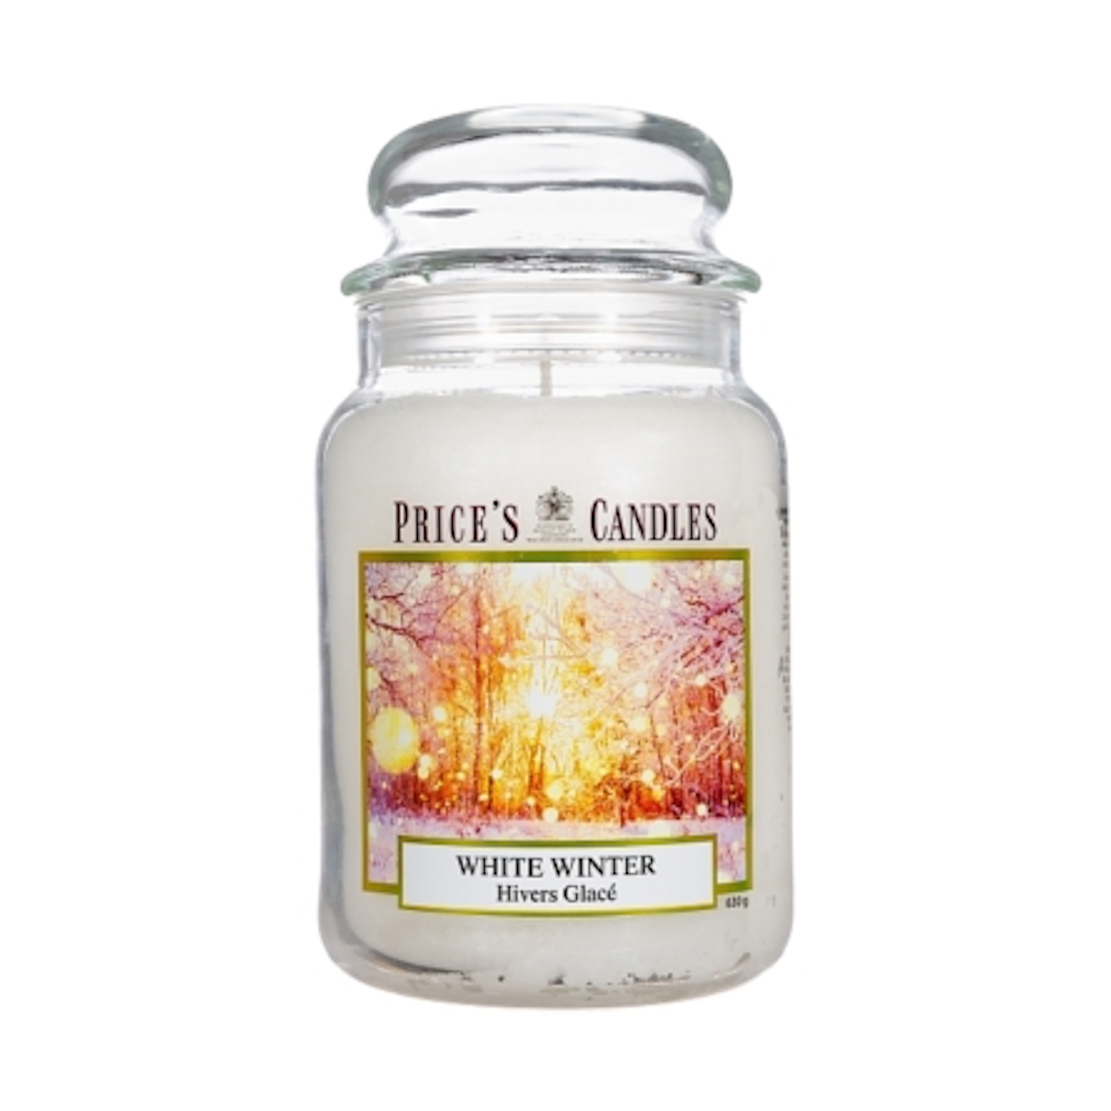 Prices Candles White Winter Large Jar